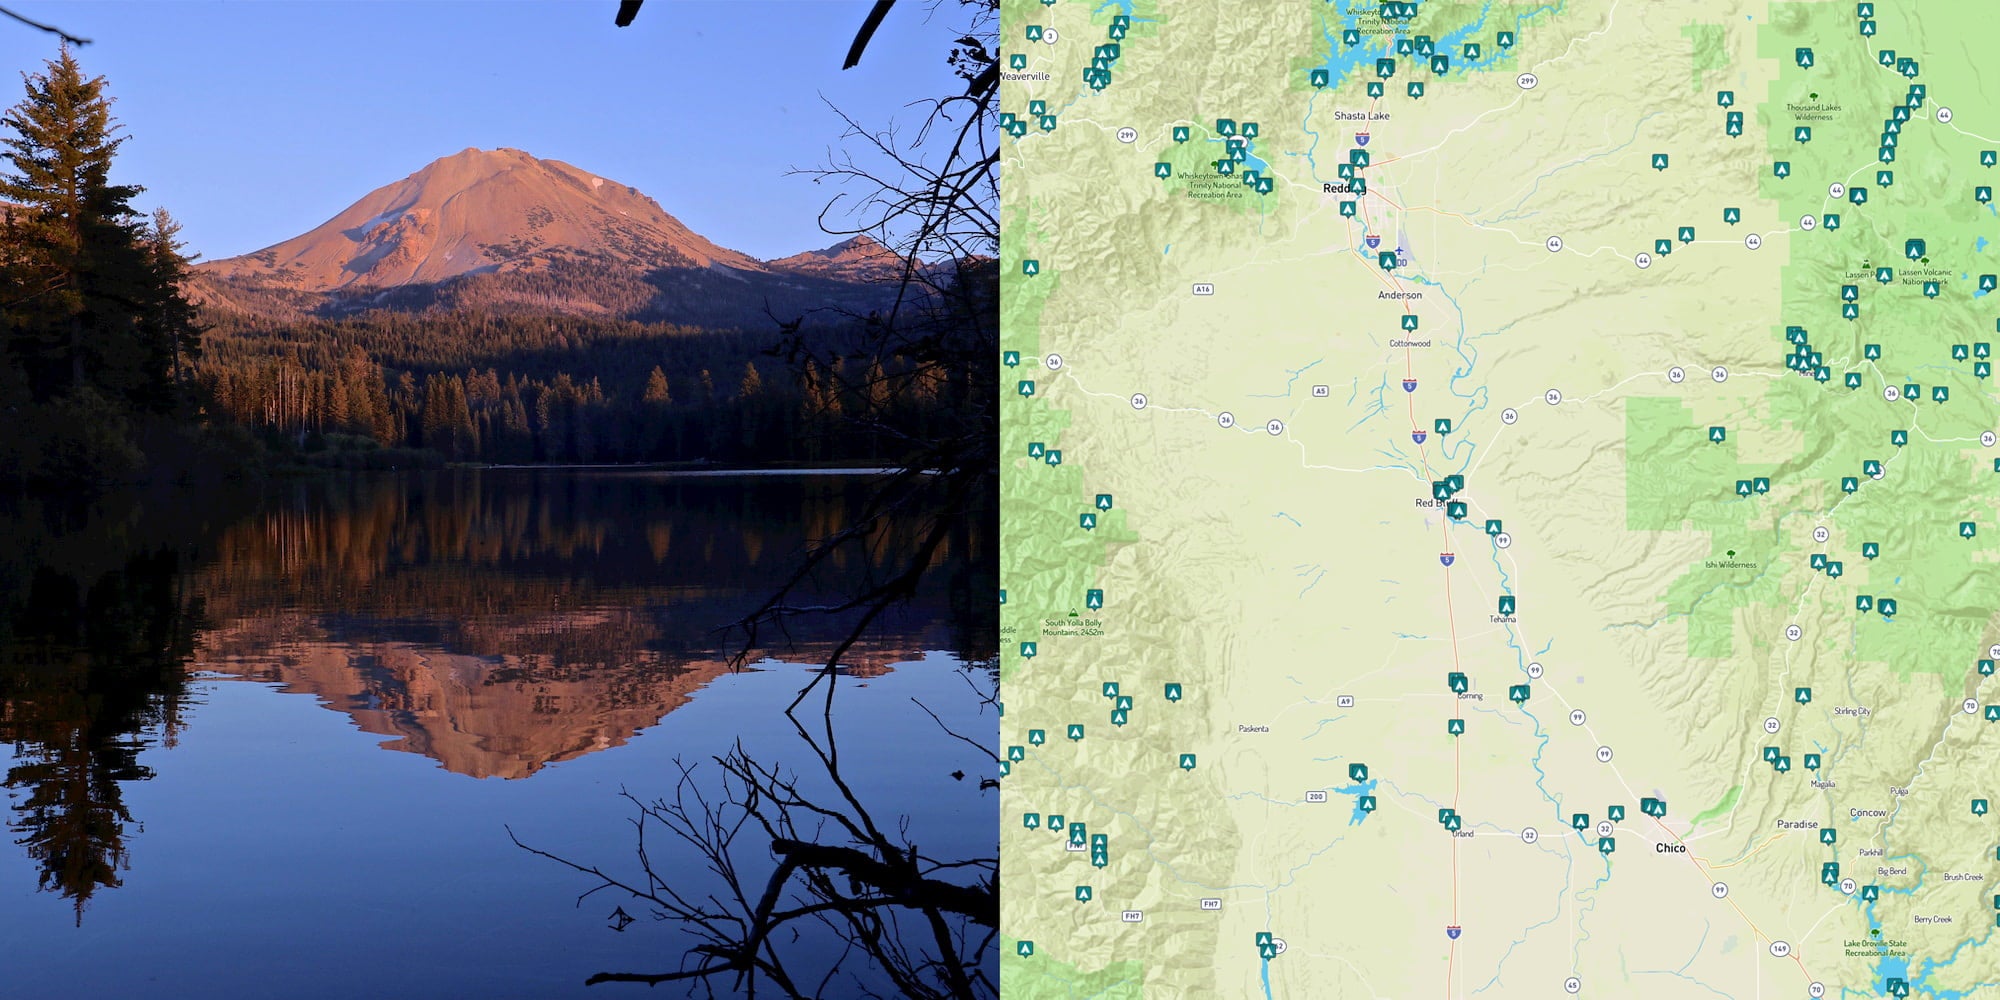 Landscape of Manzanita Lake at Lassen Volcanic and map of campgrounds near Chico and Redding in Northern California.